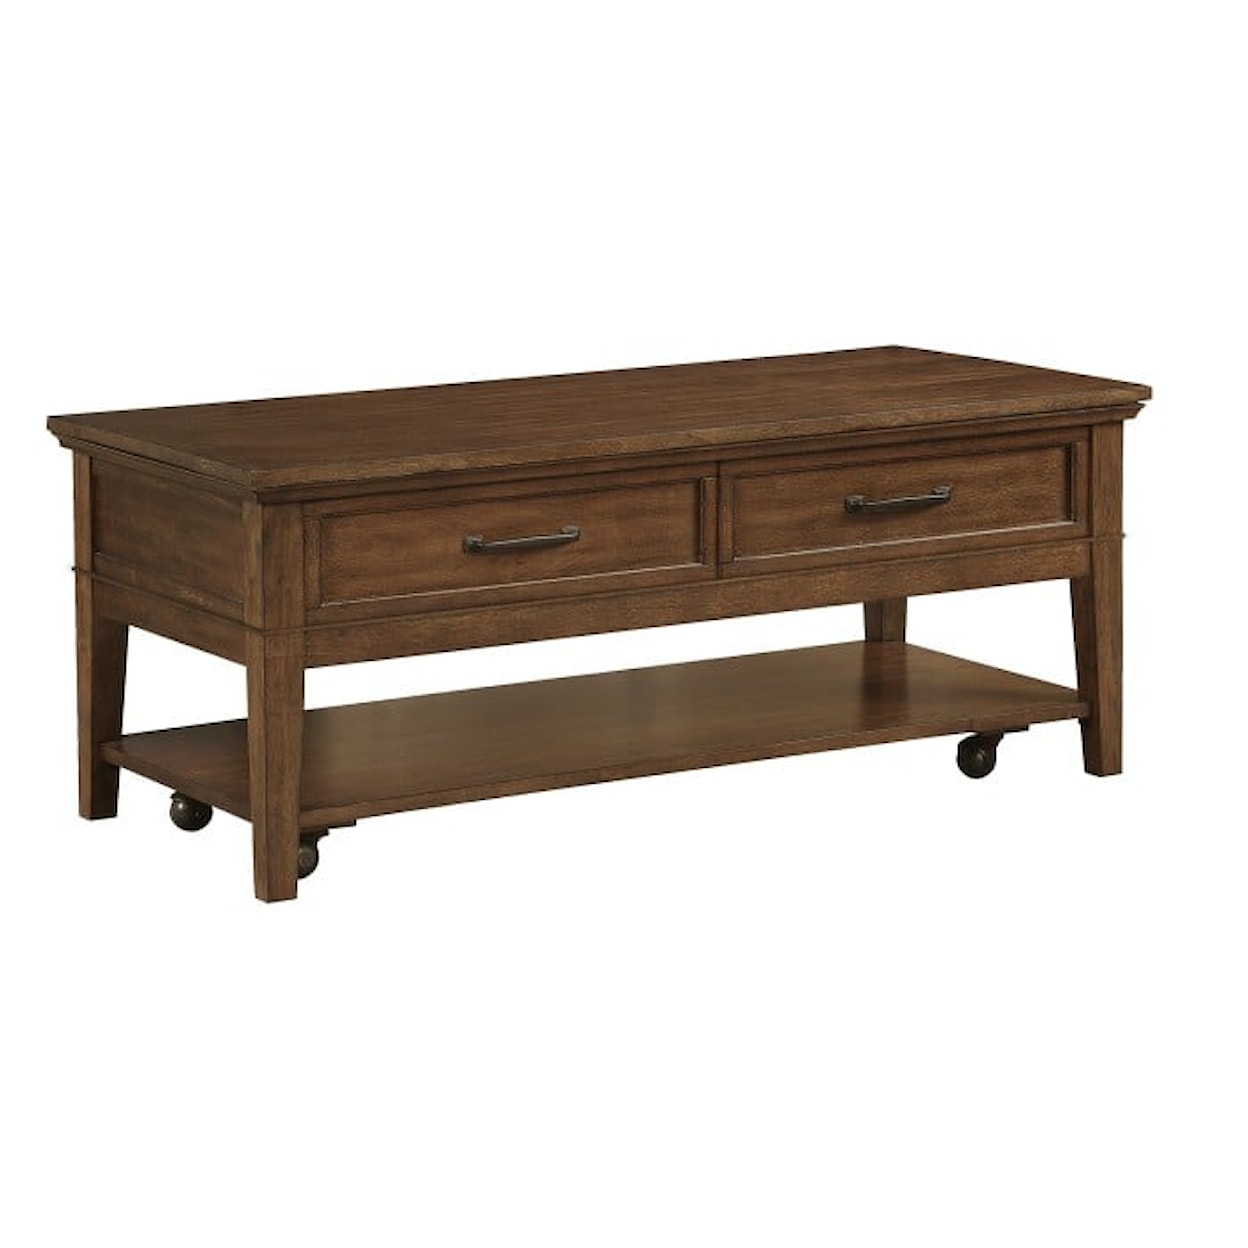 Homelegance Whitley Cocktail Table